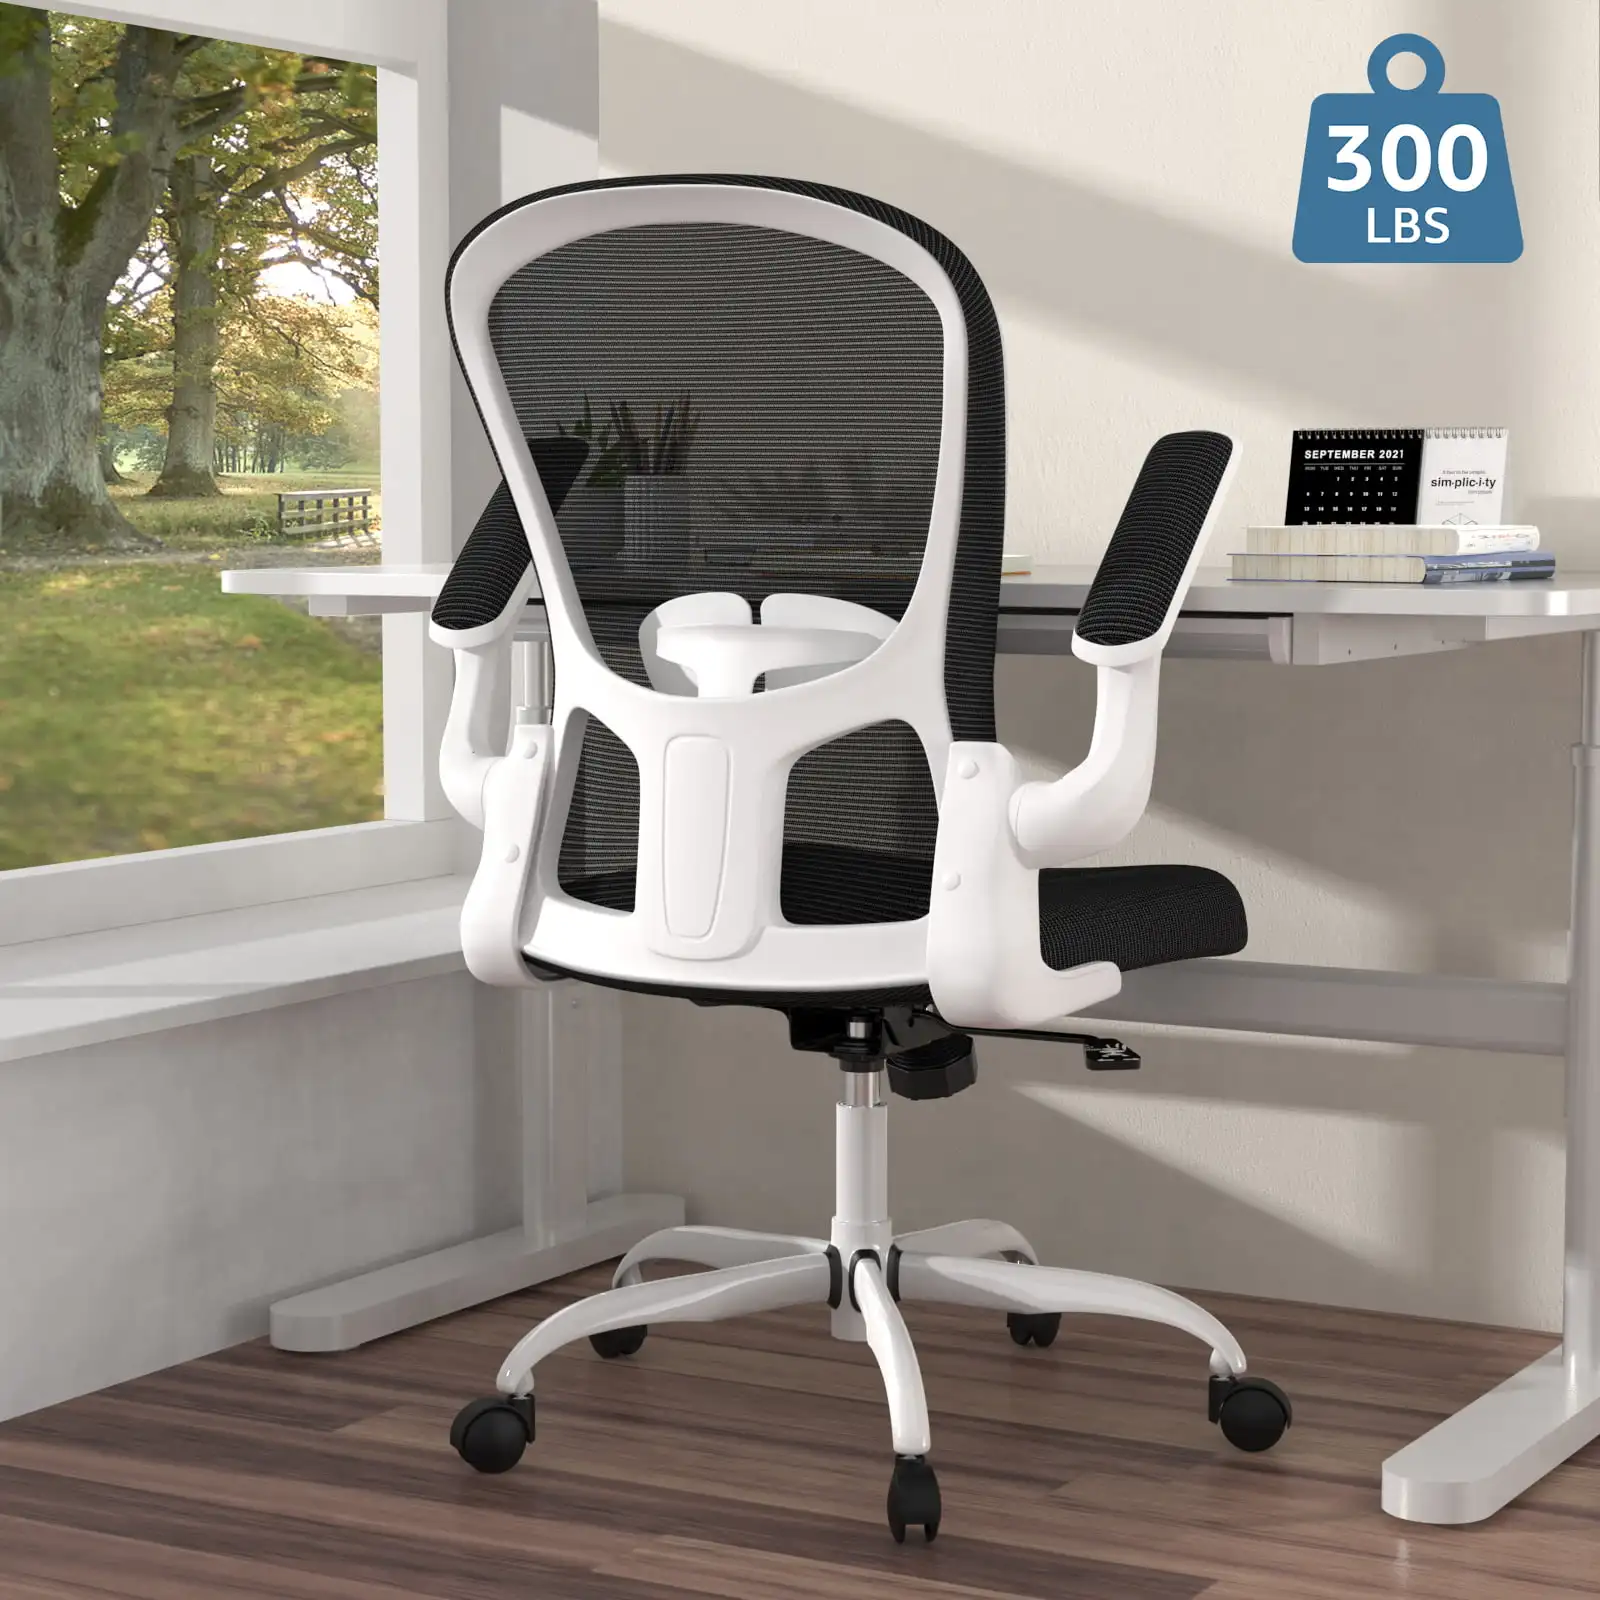 

Silybon Ergonomic Office Chair, Comfort Home Office Task Chair, Lumbar Support Computer Chair with Flip-up Arms and Adjus